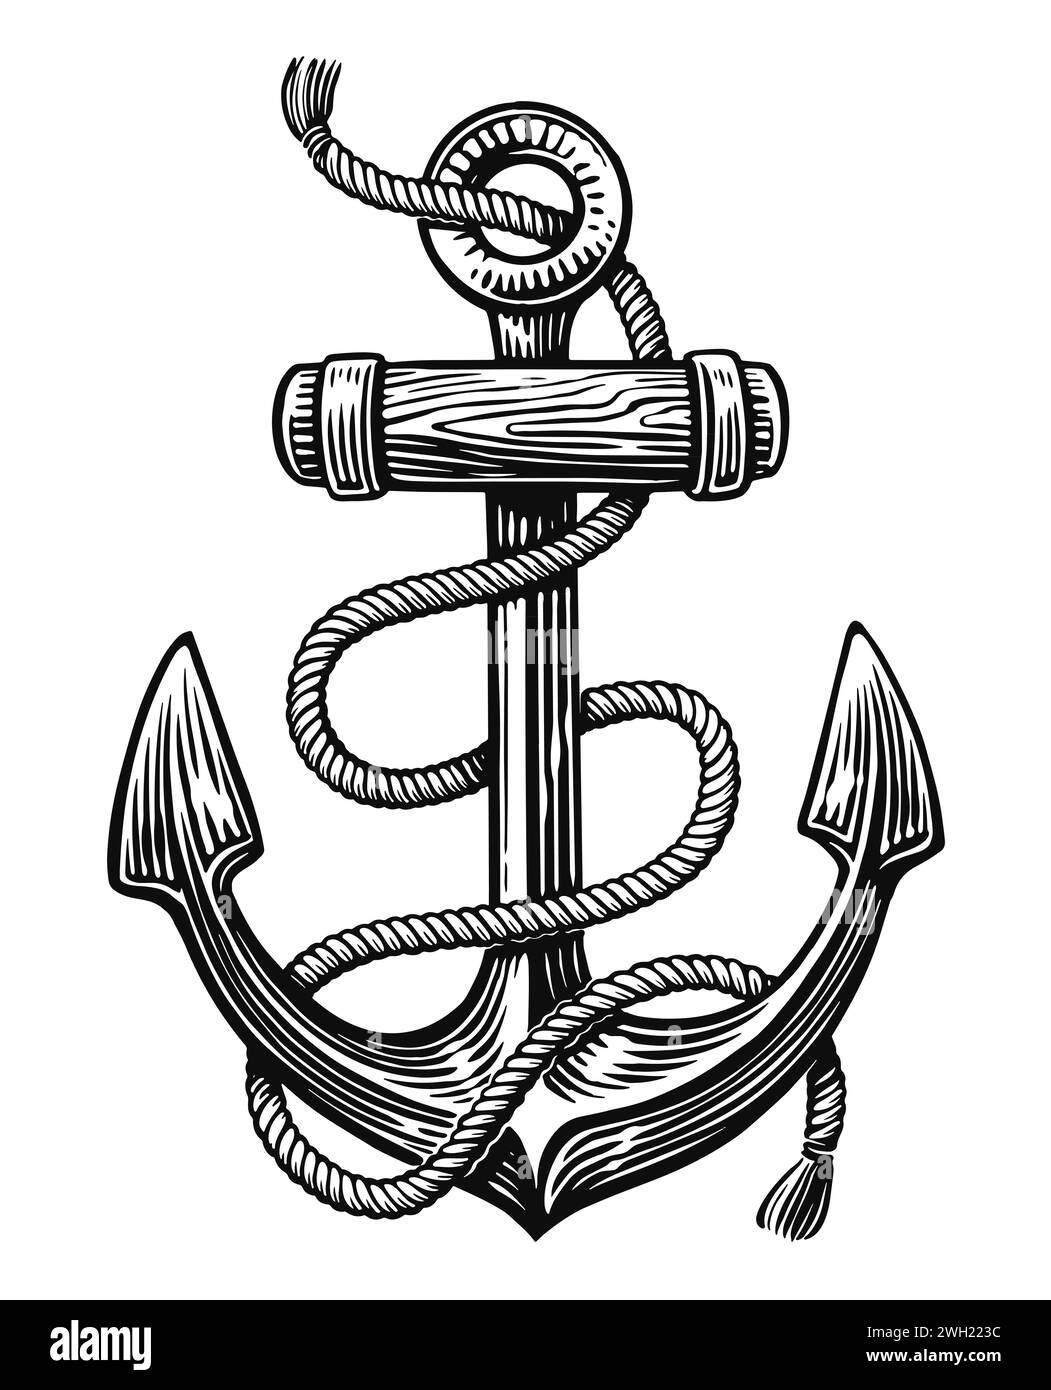 Hand drawn sketch of ship nautical Anchor with rope. Vintage illustration Stock Photo